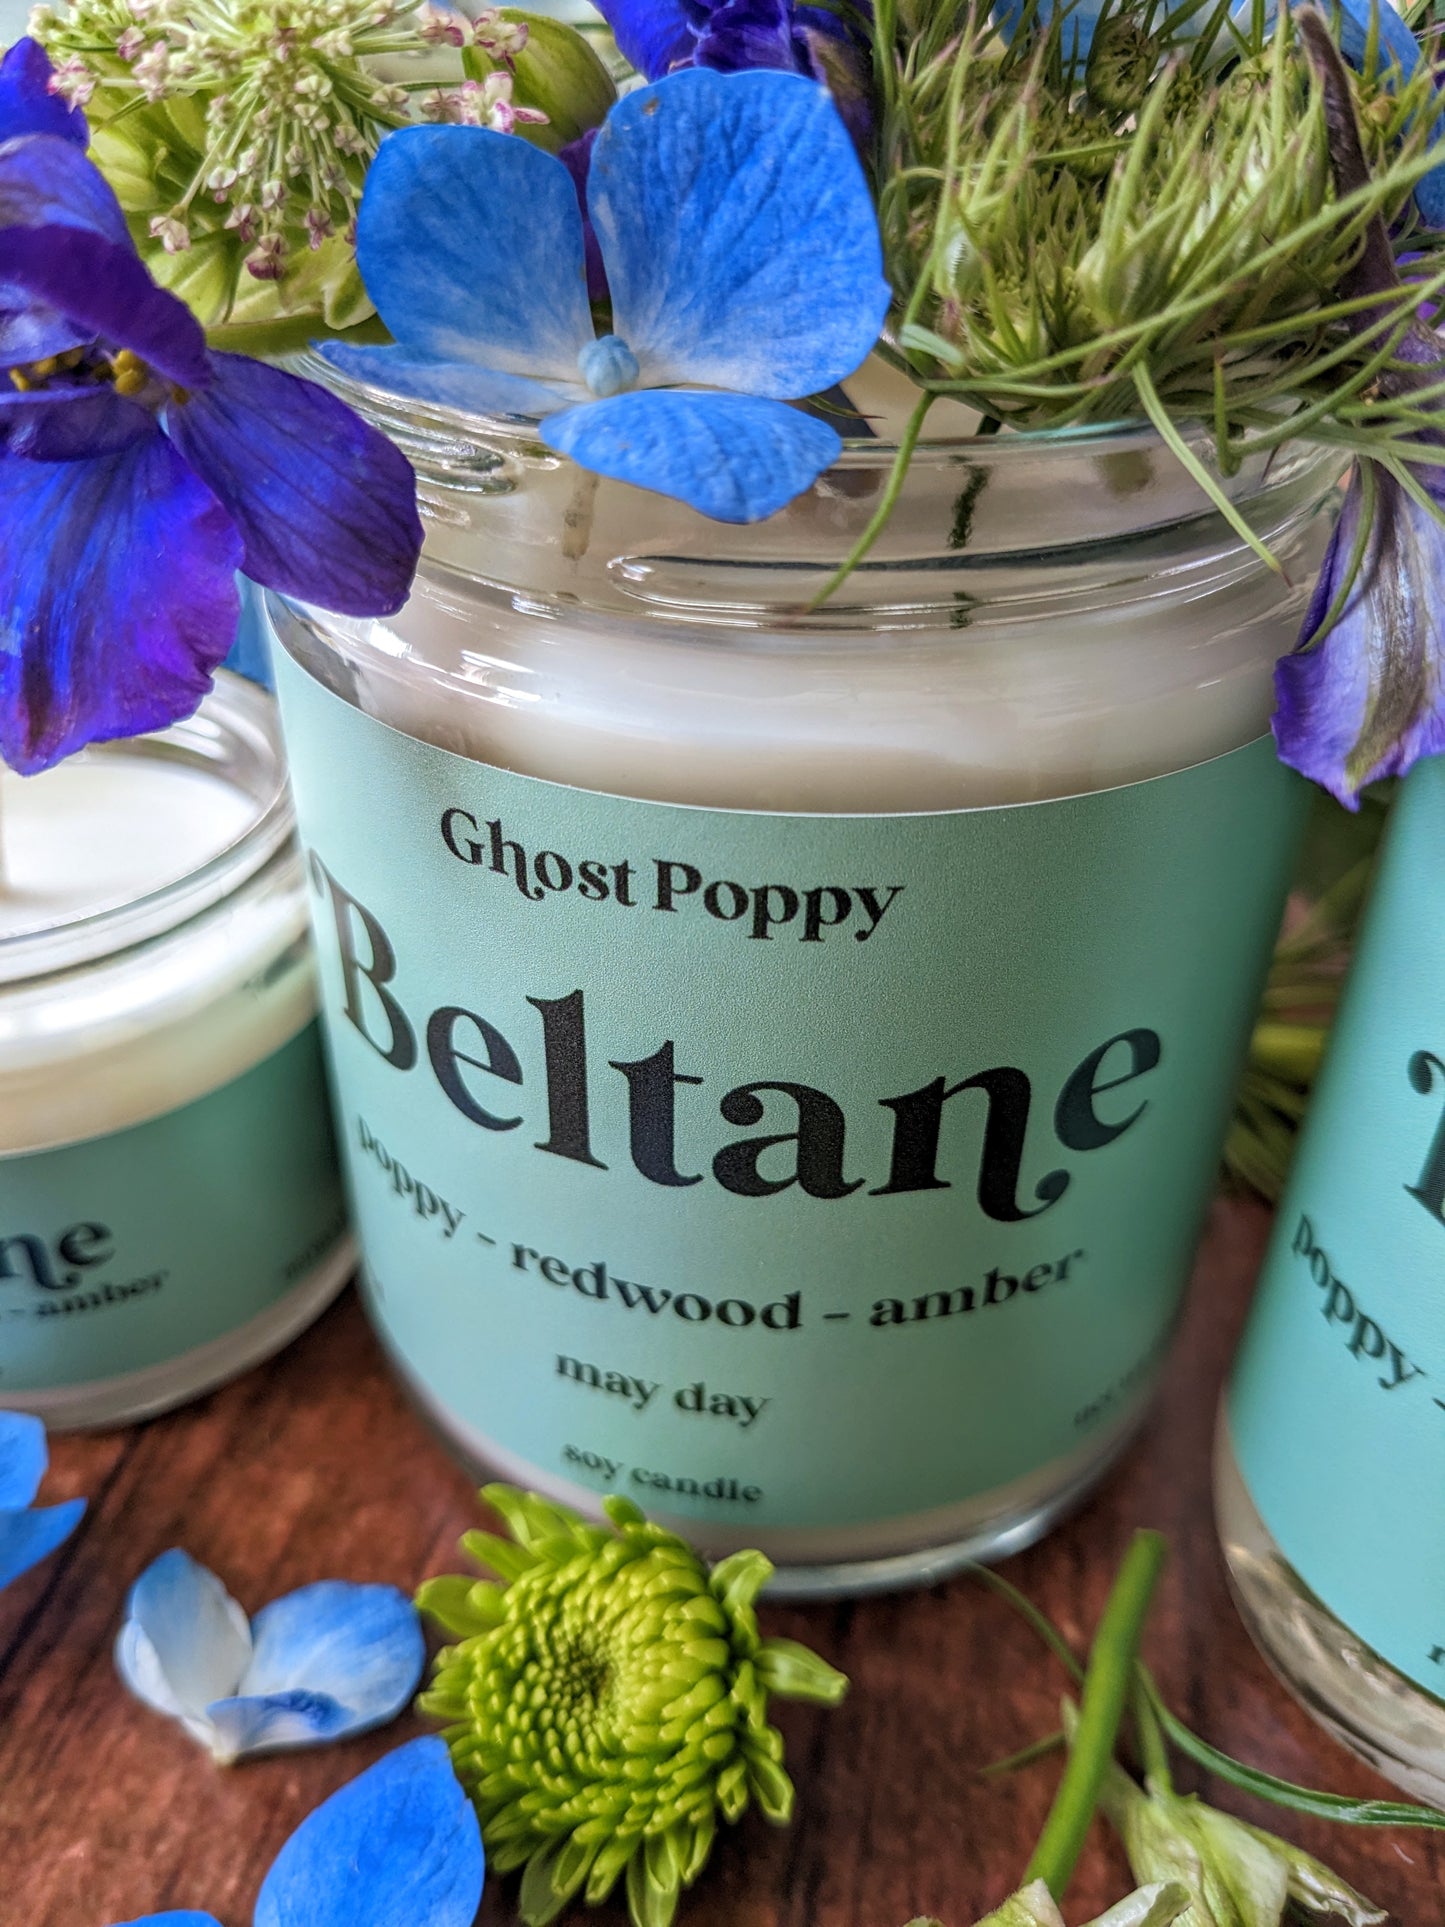 Beltane Candle